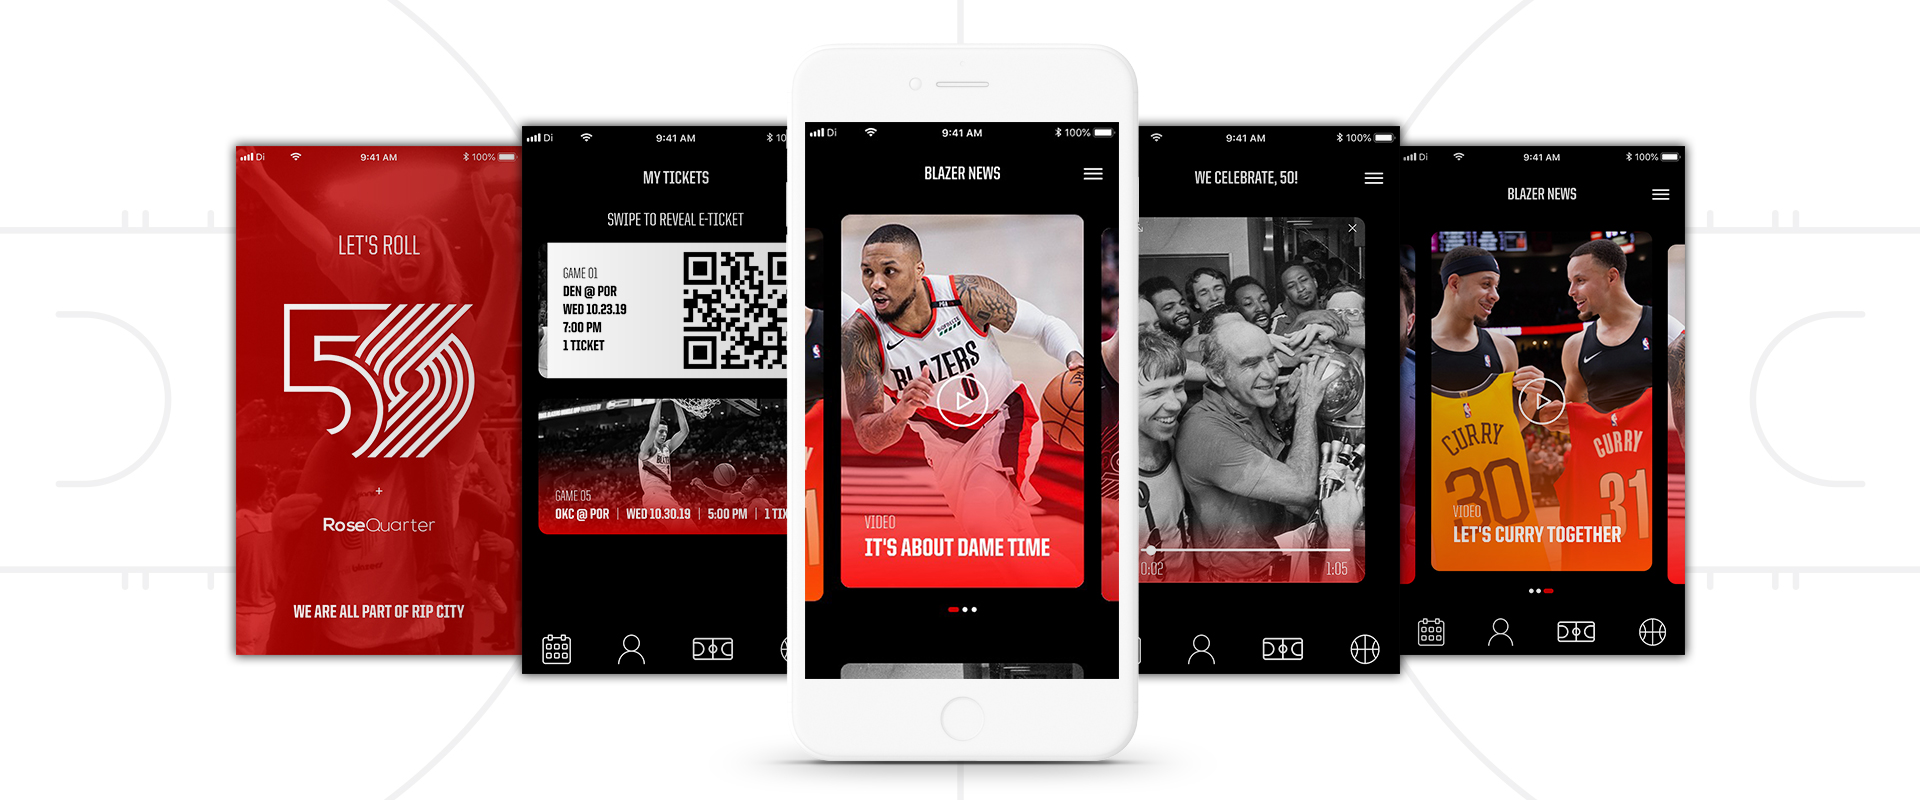 Quick view of different stages of the Trail Blazers app